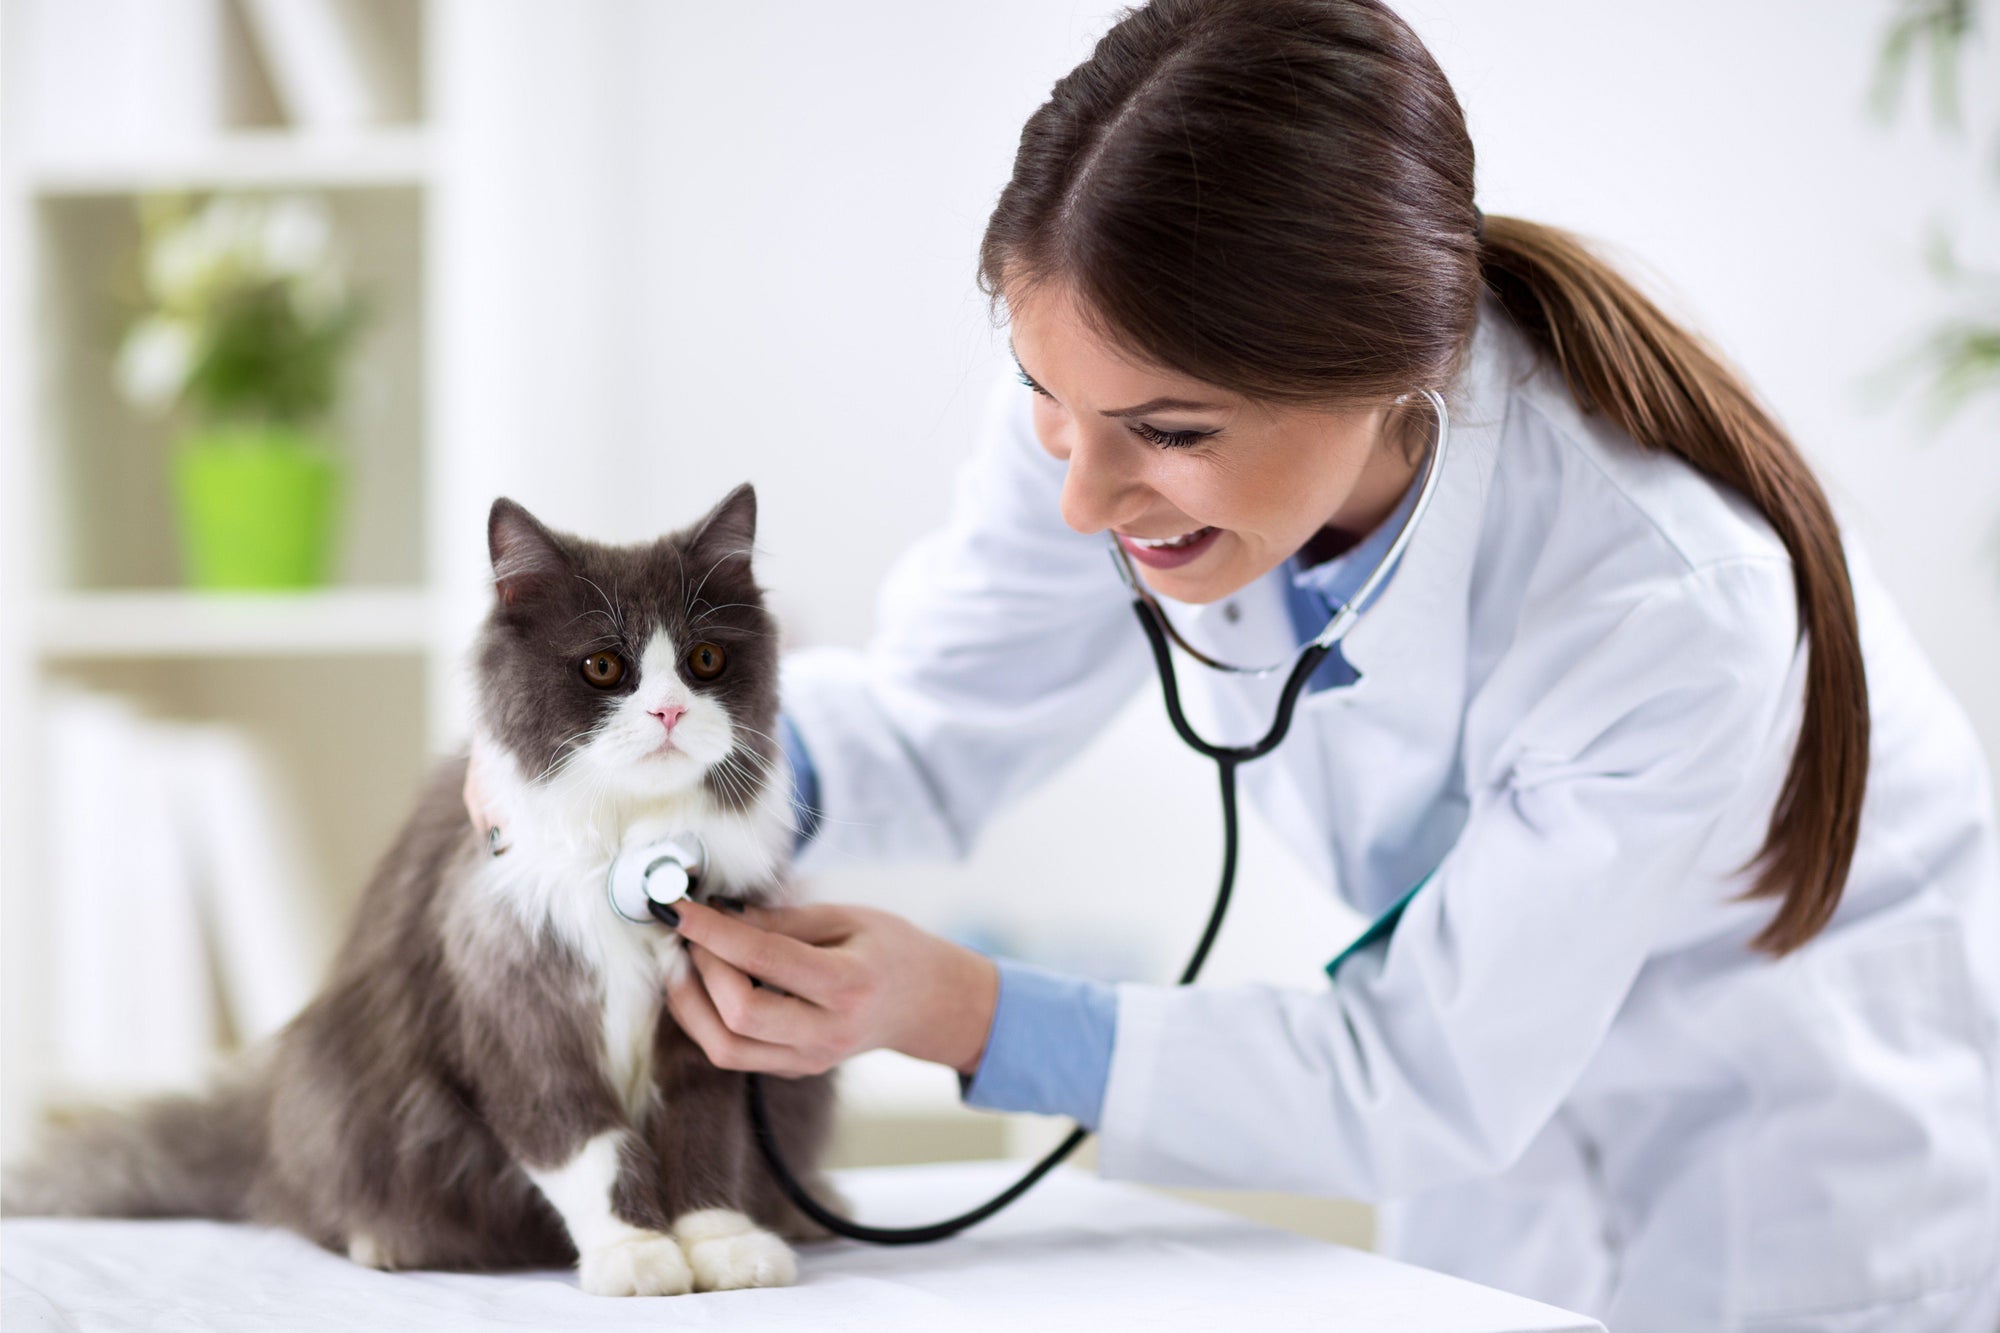 Helpful Information About Lower Urinary Tract Disease in Cats